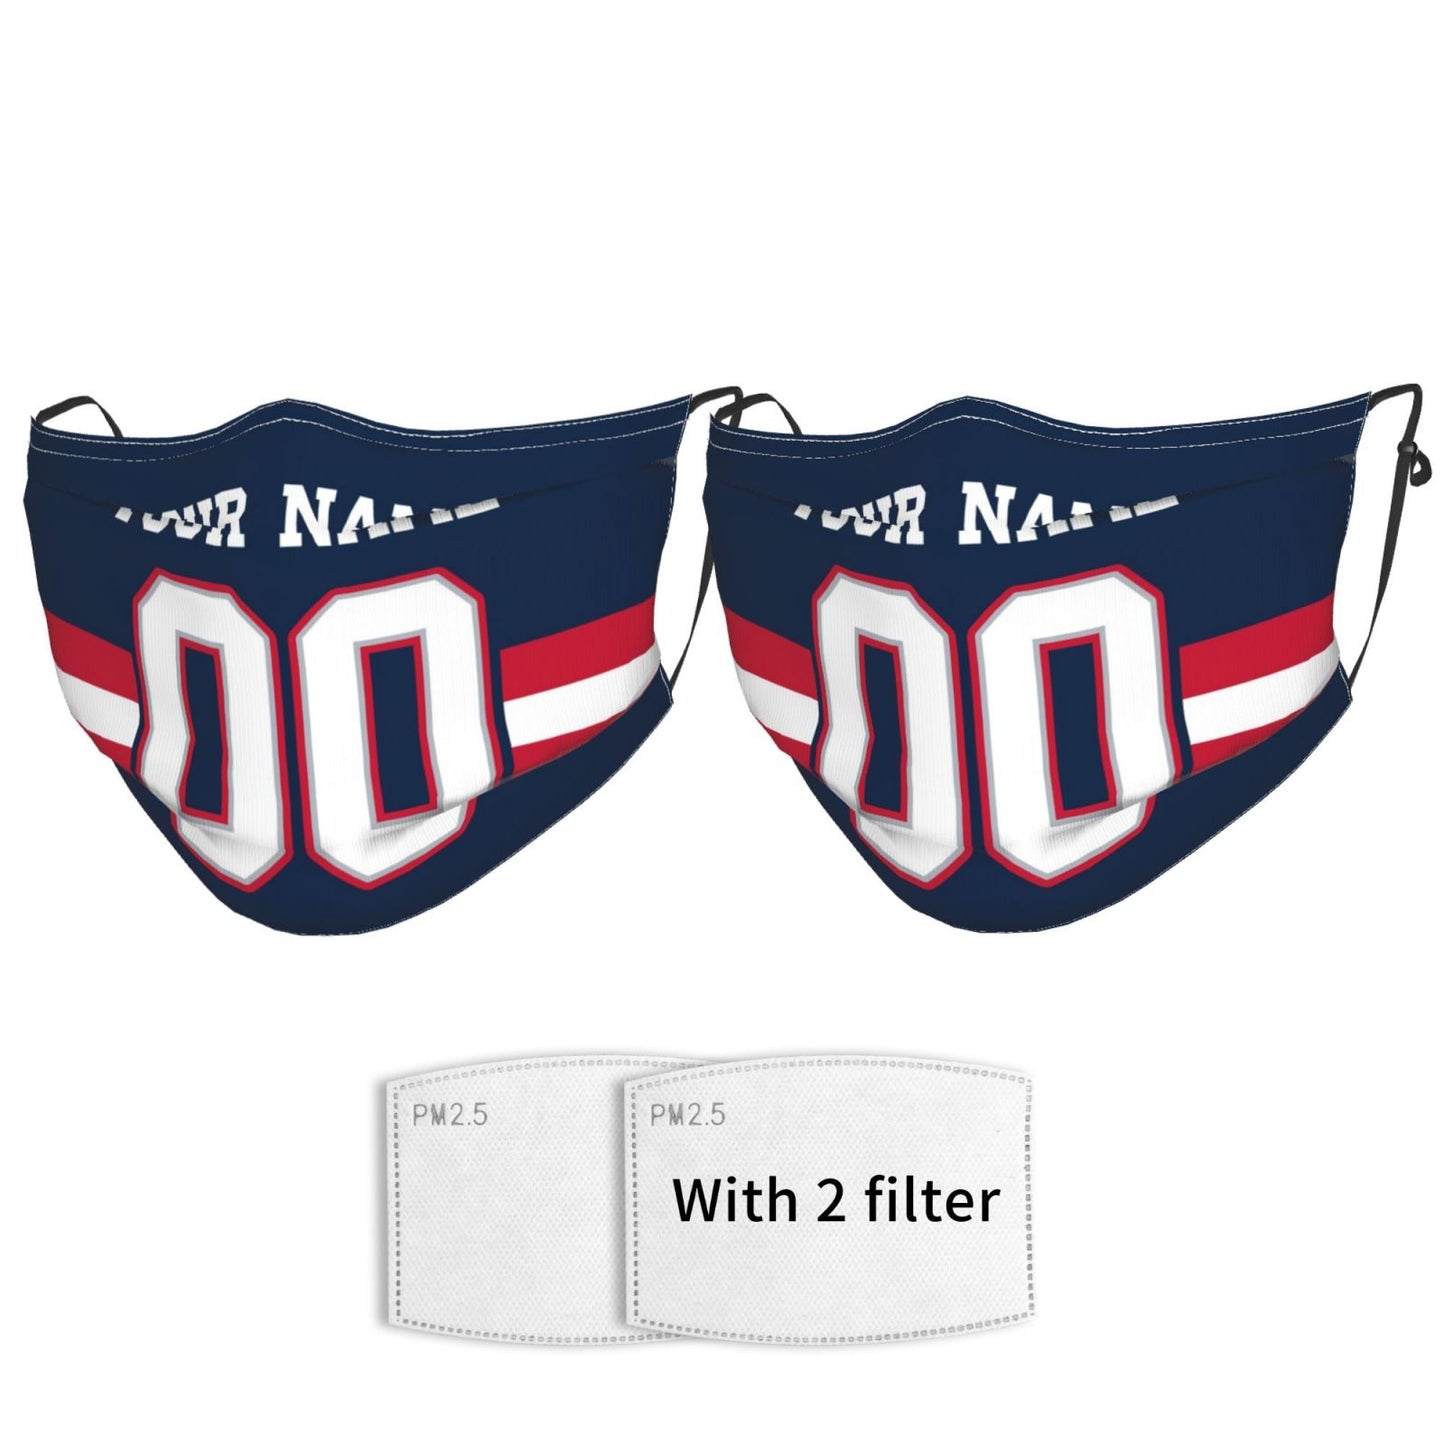 2-Pack New England Patriots Face Covering Football Team Decorative Adult Face Mask With Filters PM 2.5 Navy